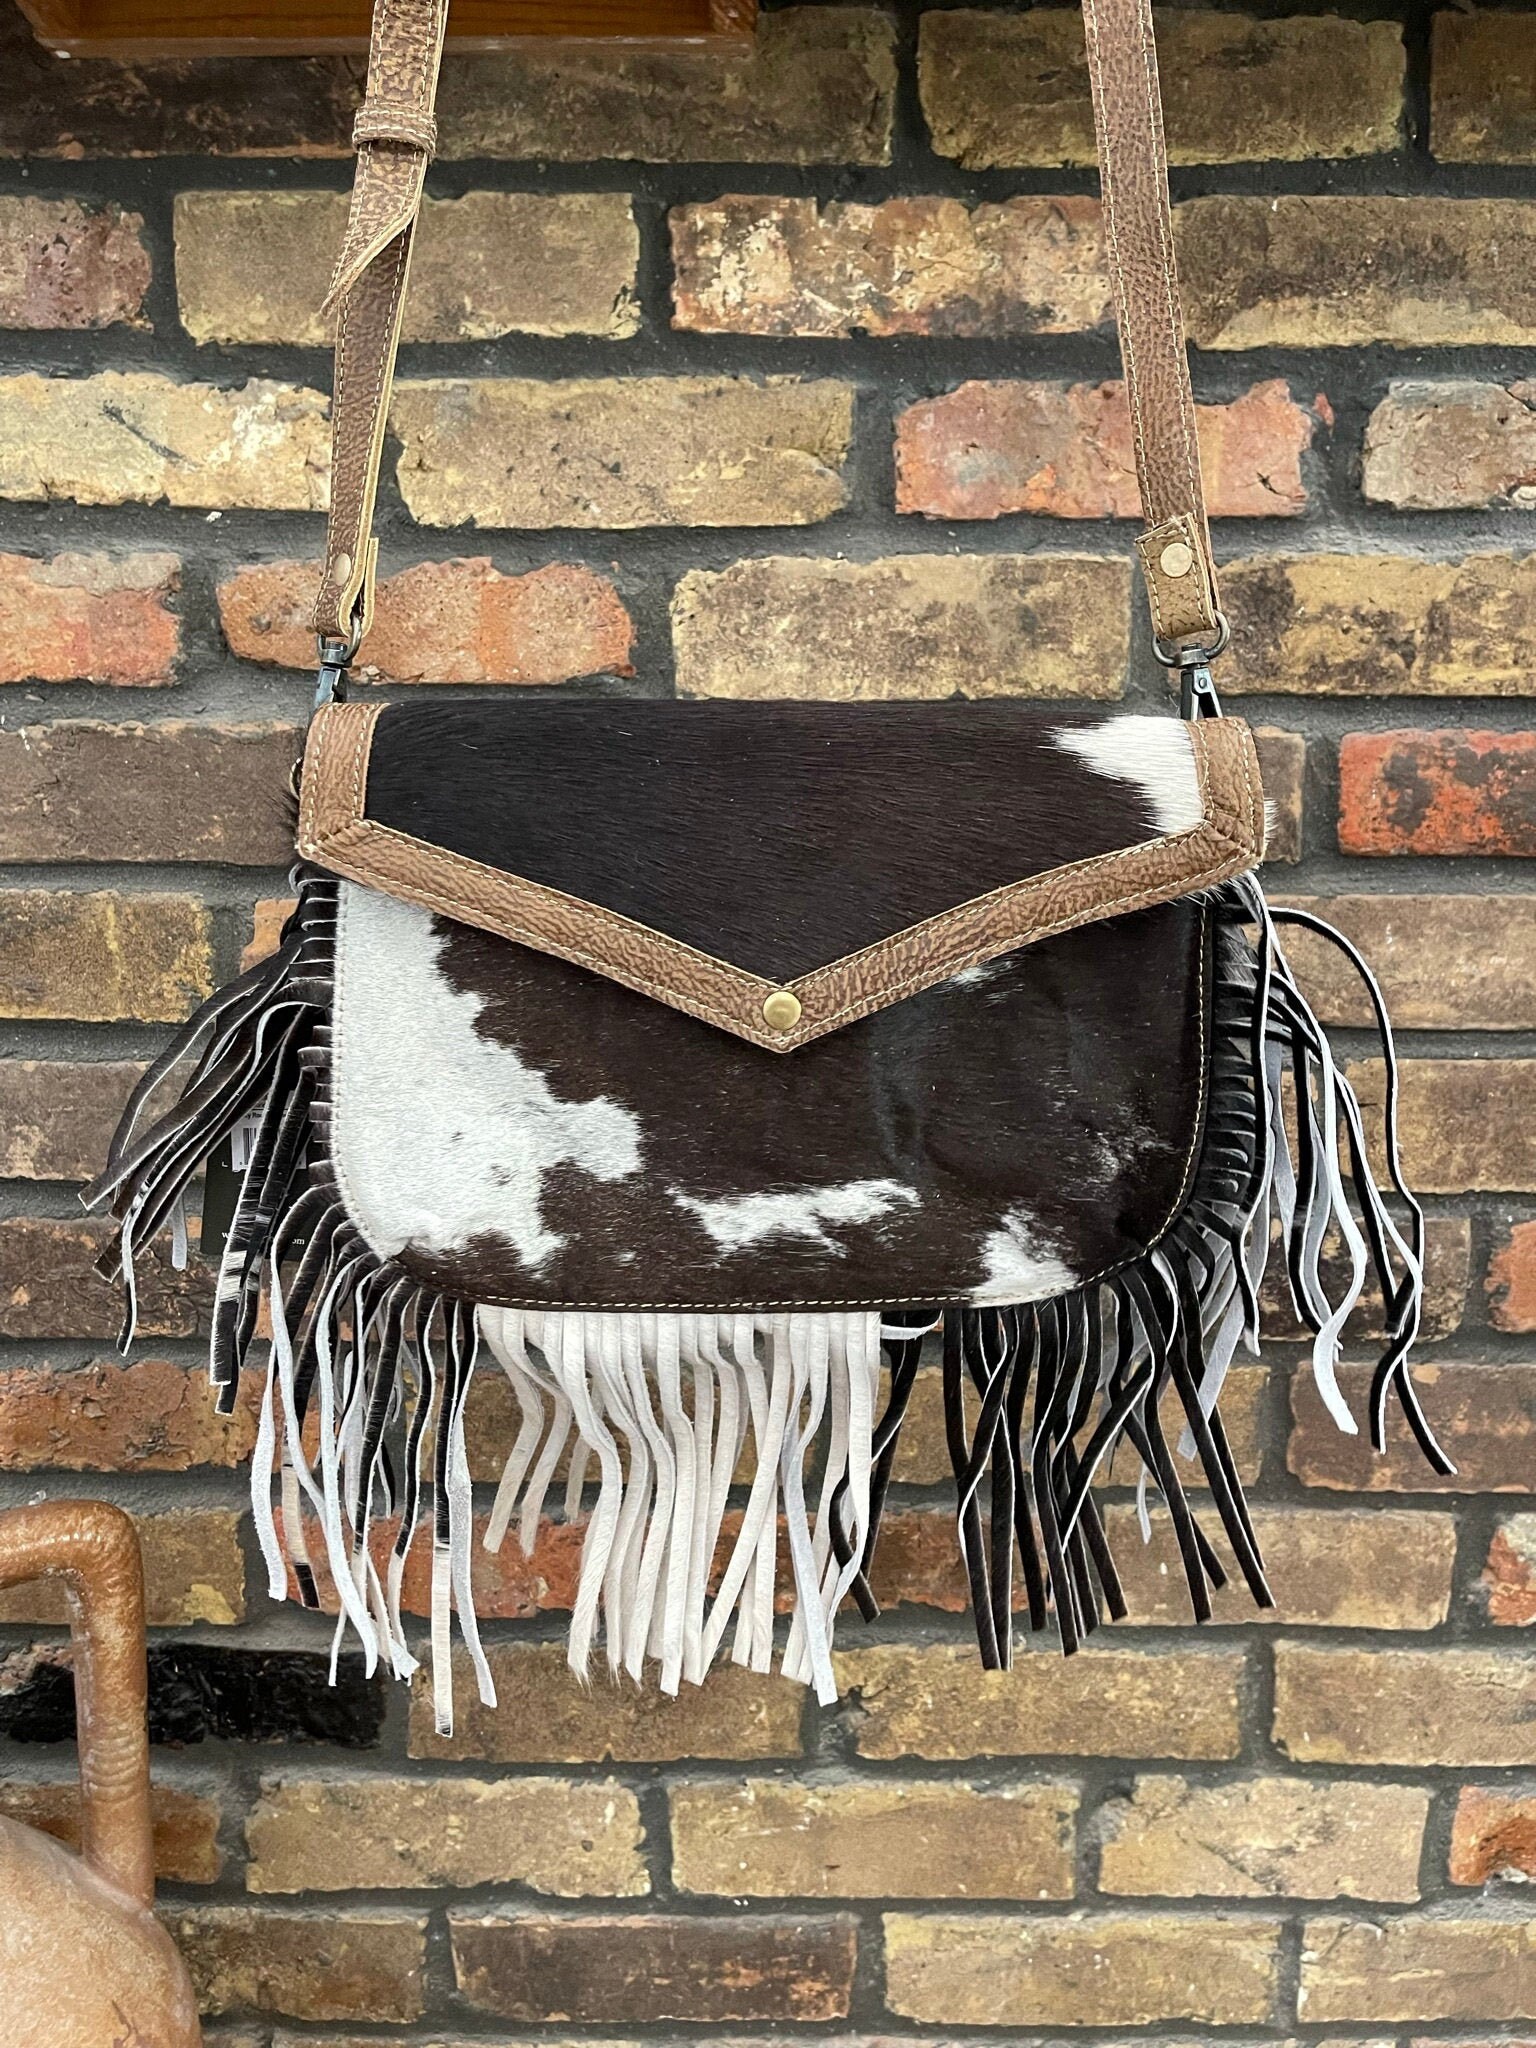 Myra Silky Route Brown Black White Cowhide Leather Fringe | Etsy